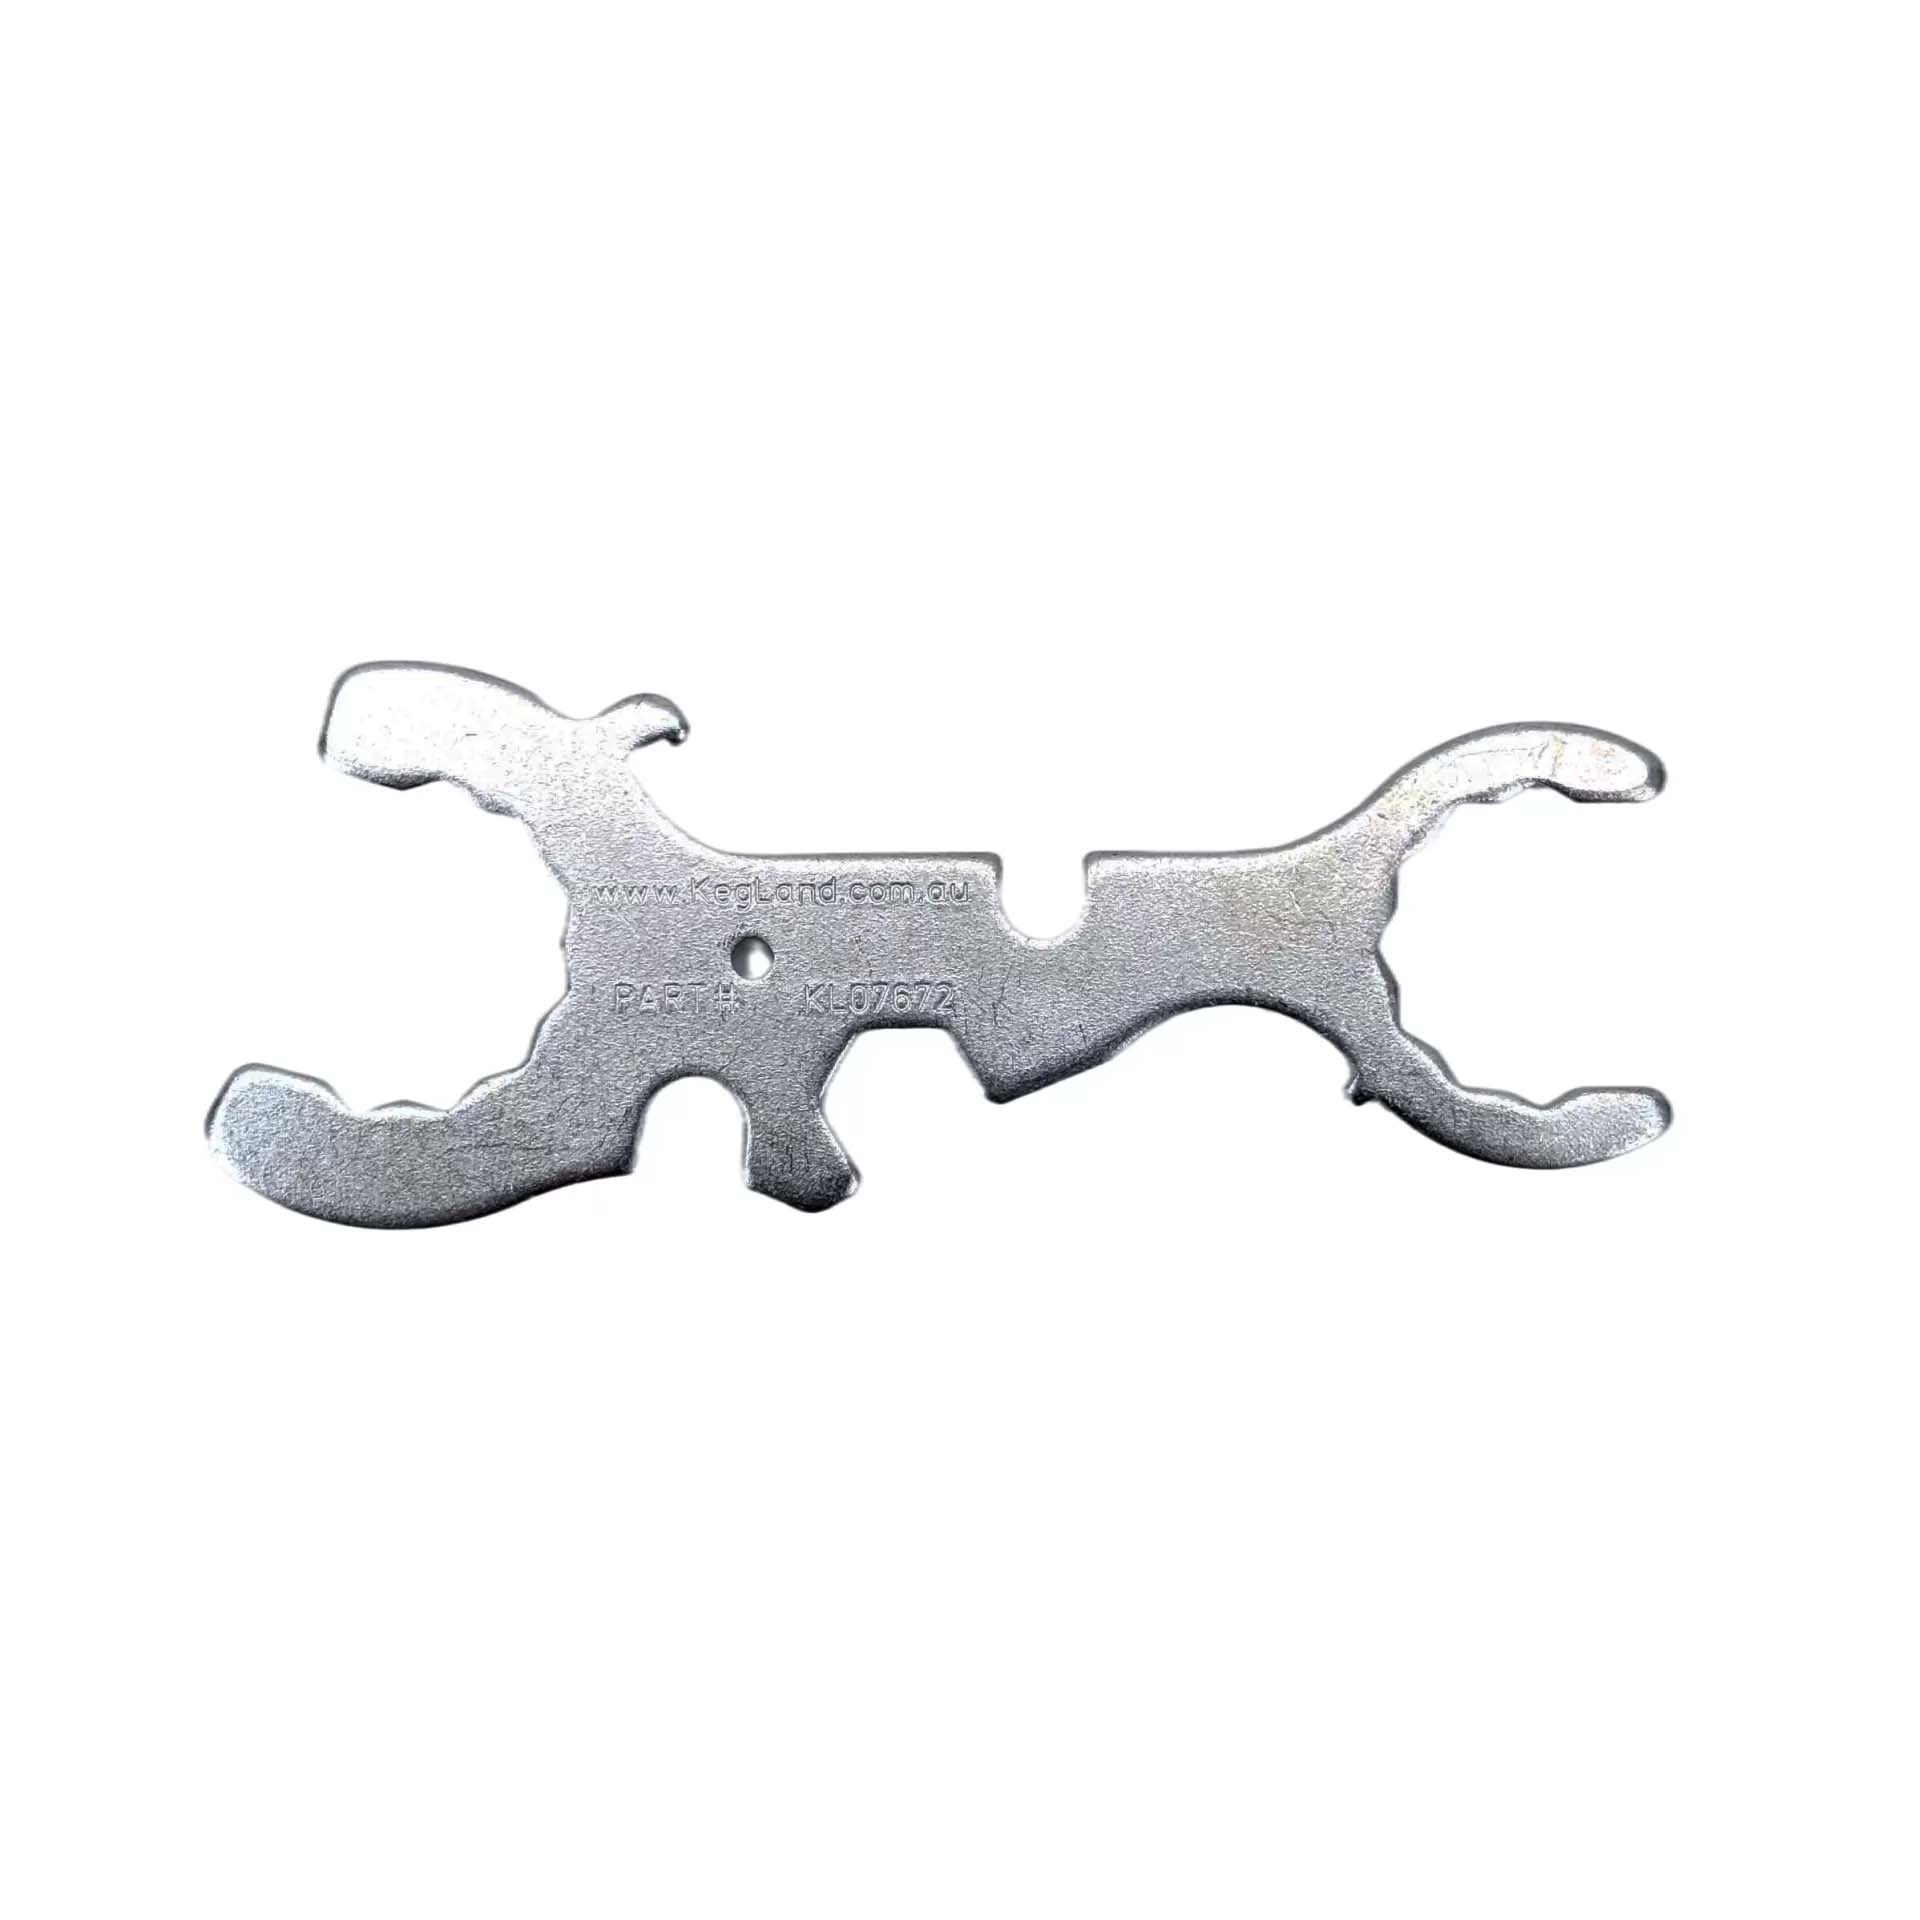 7 in 1 Faucet Spanner / Wrench Tool